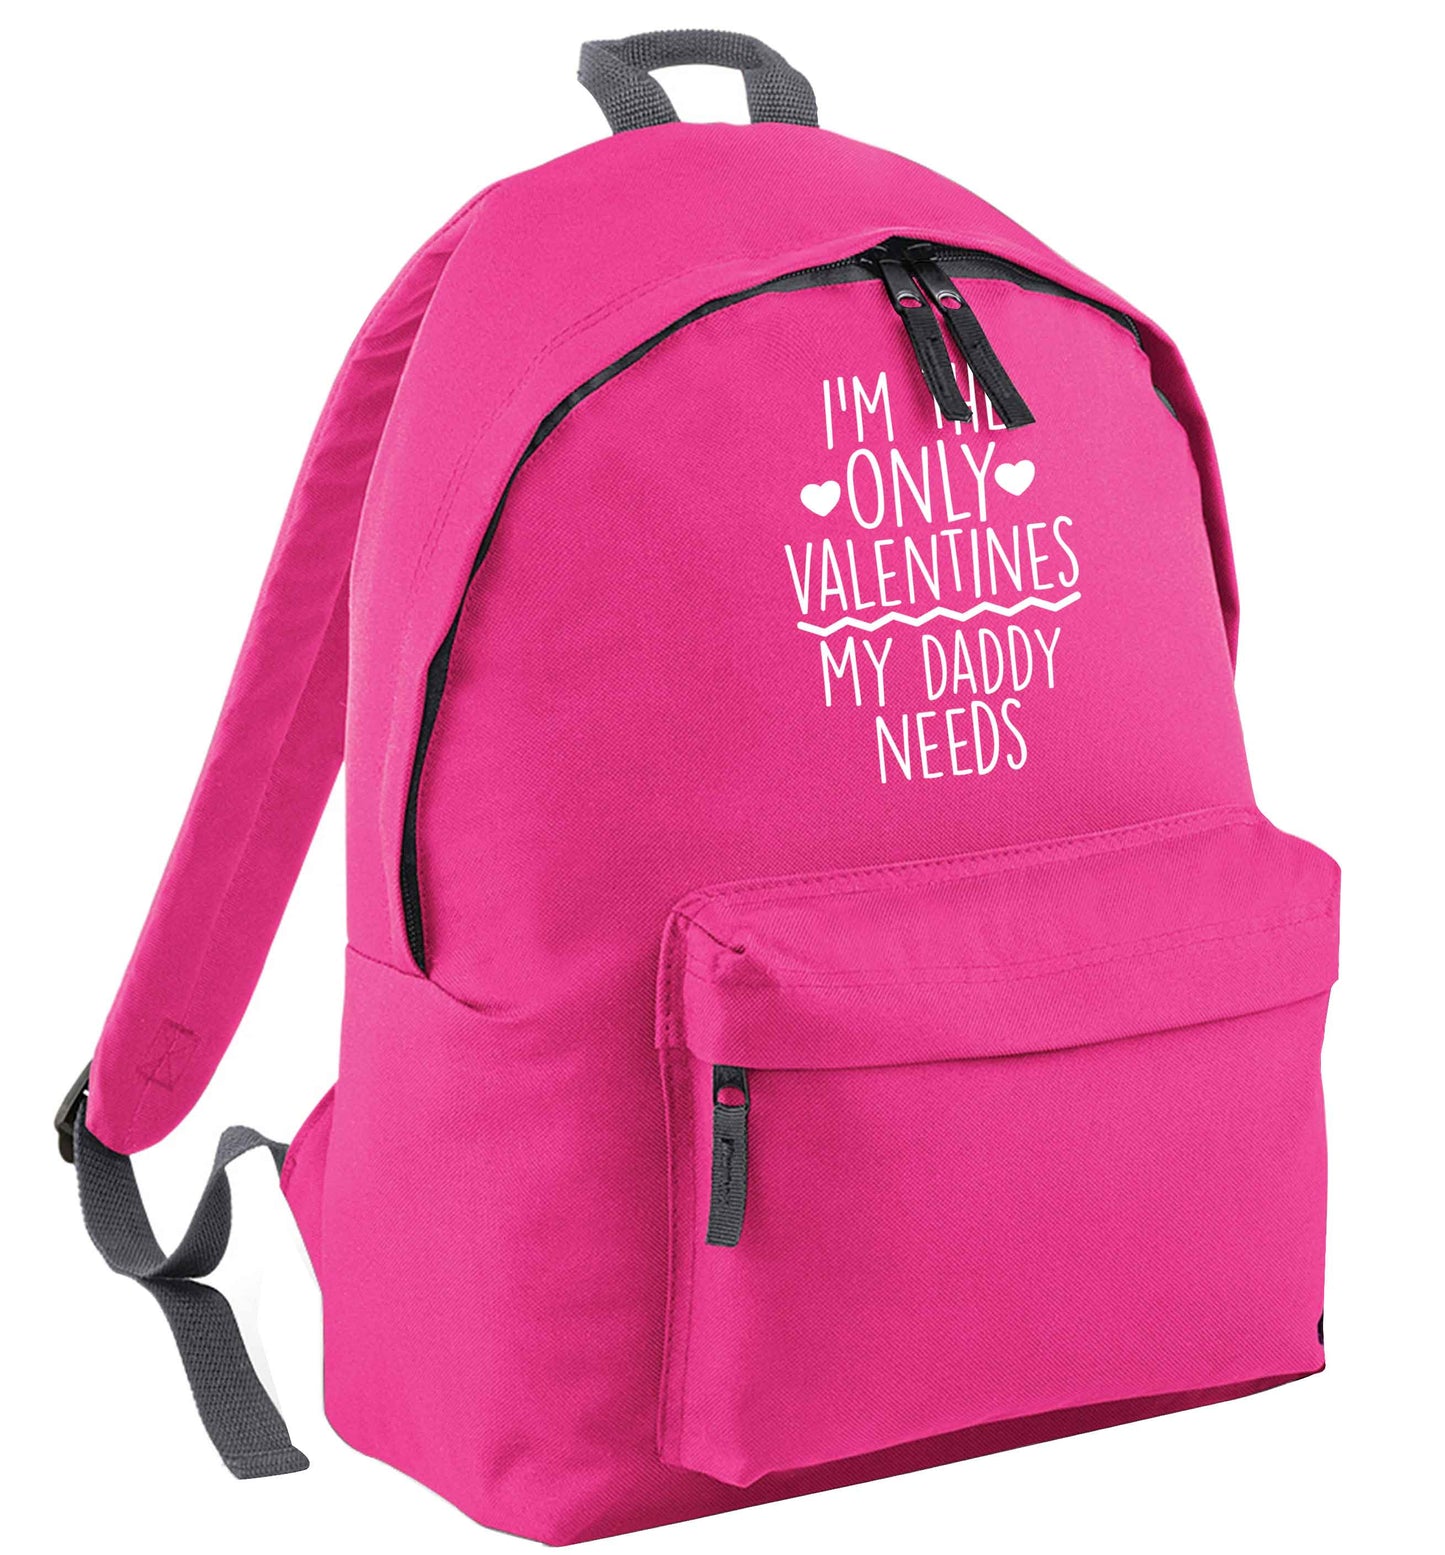 I'm the only valentines my daddy needs pink adults backpack